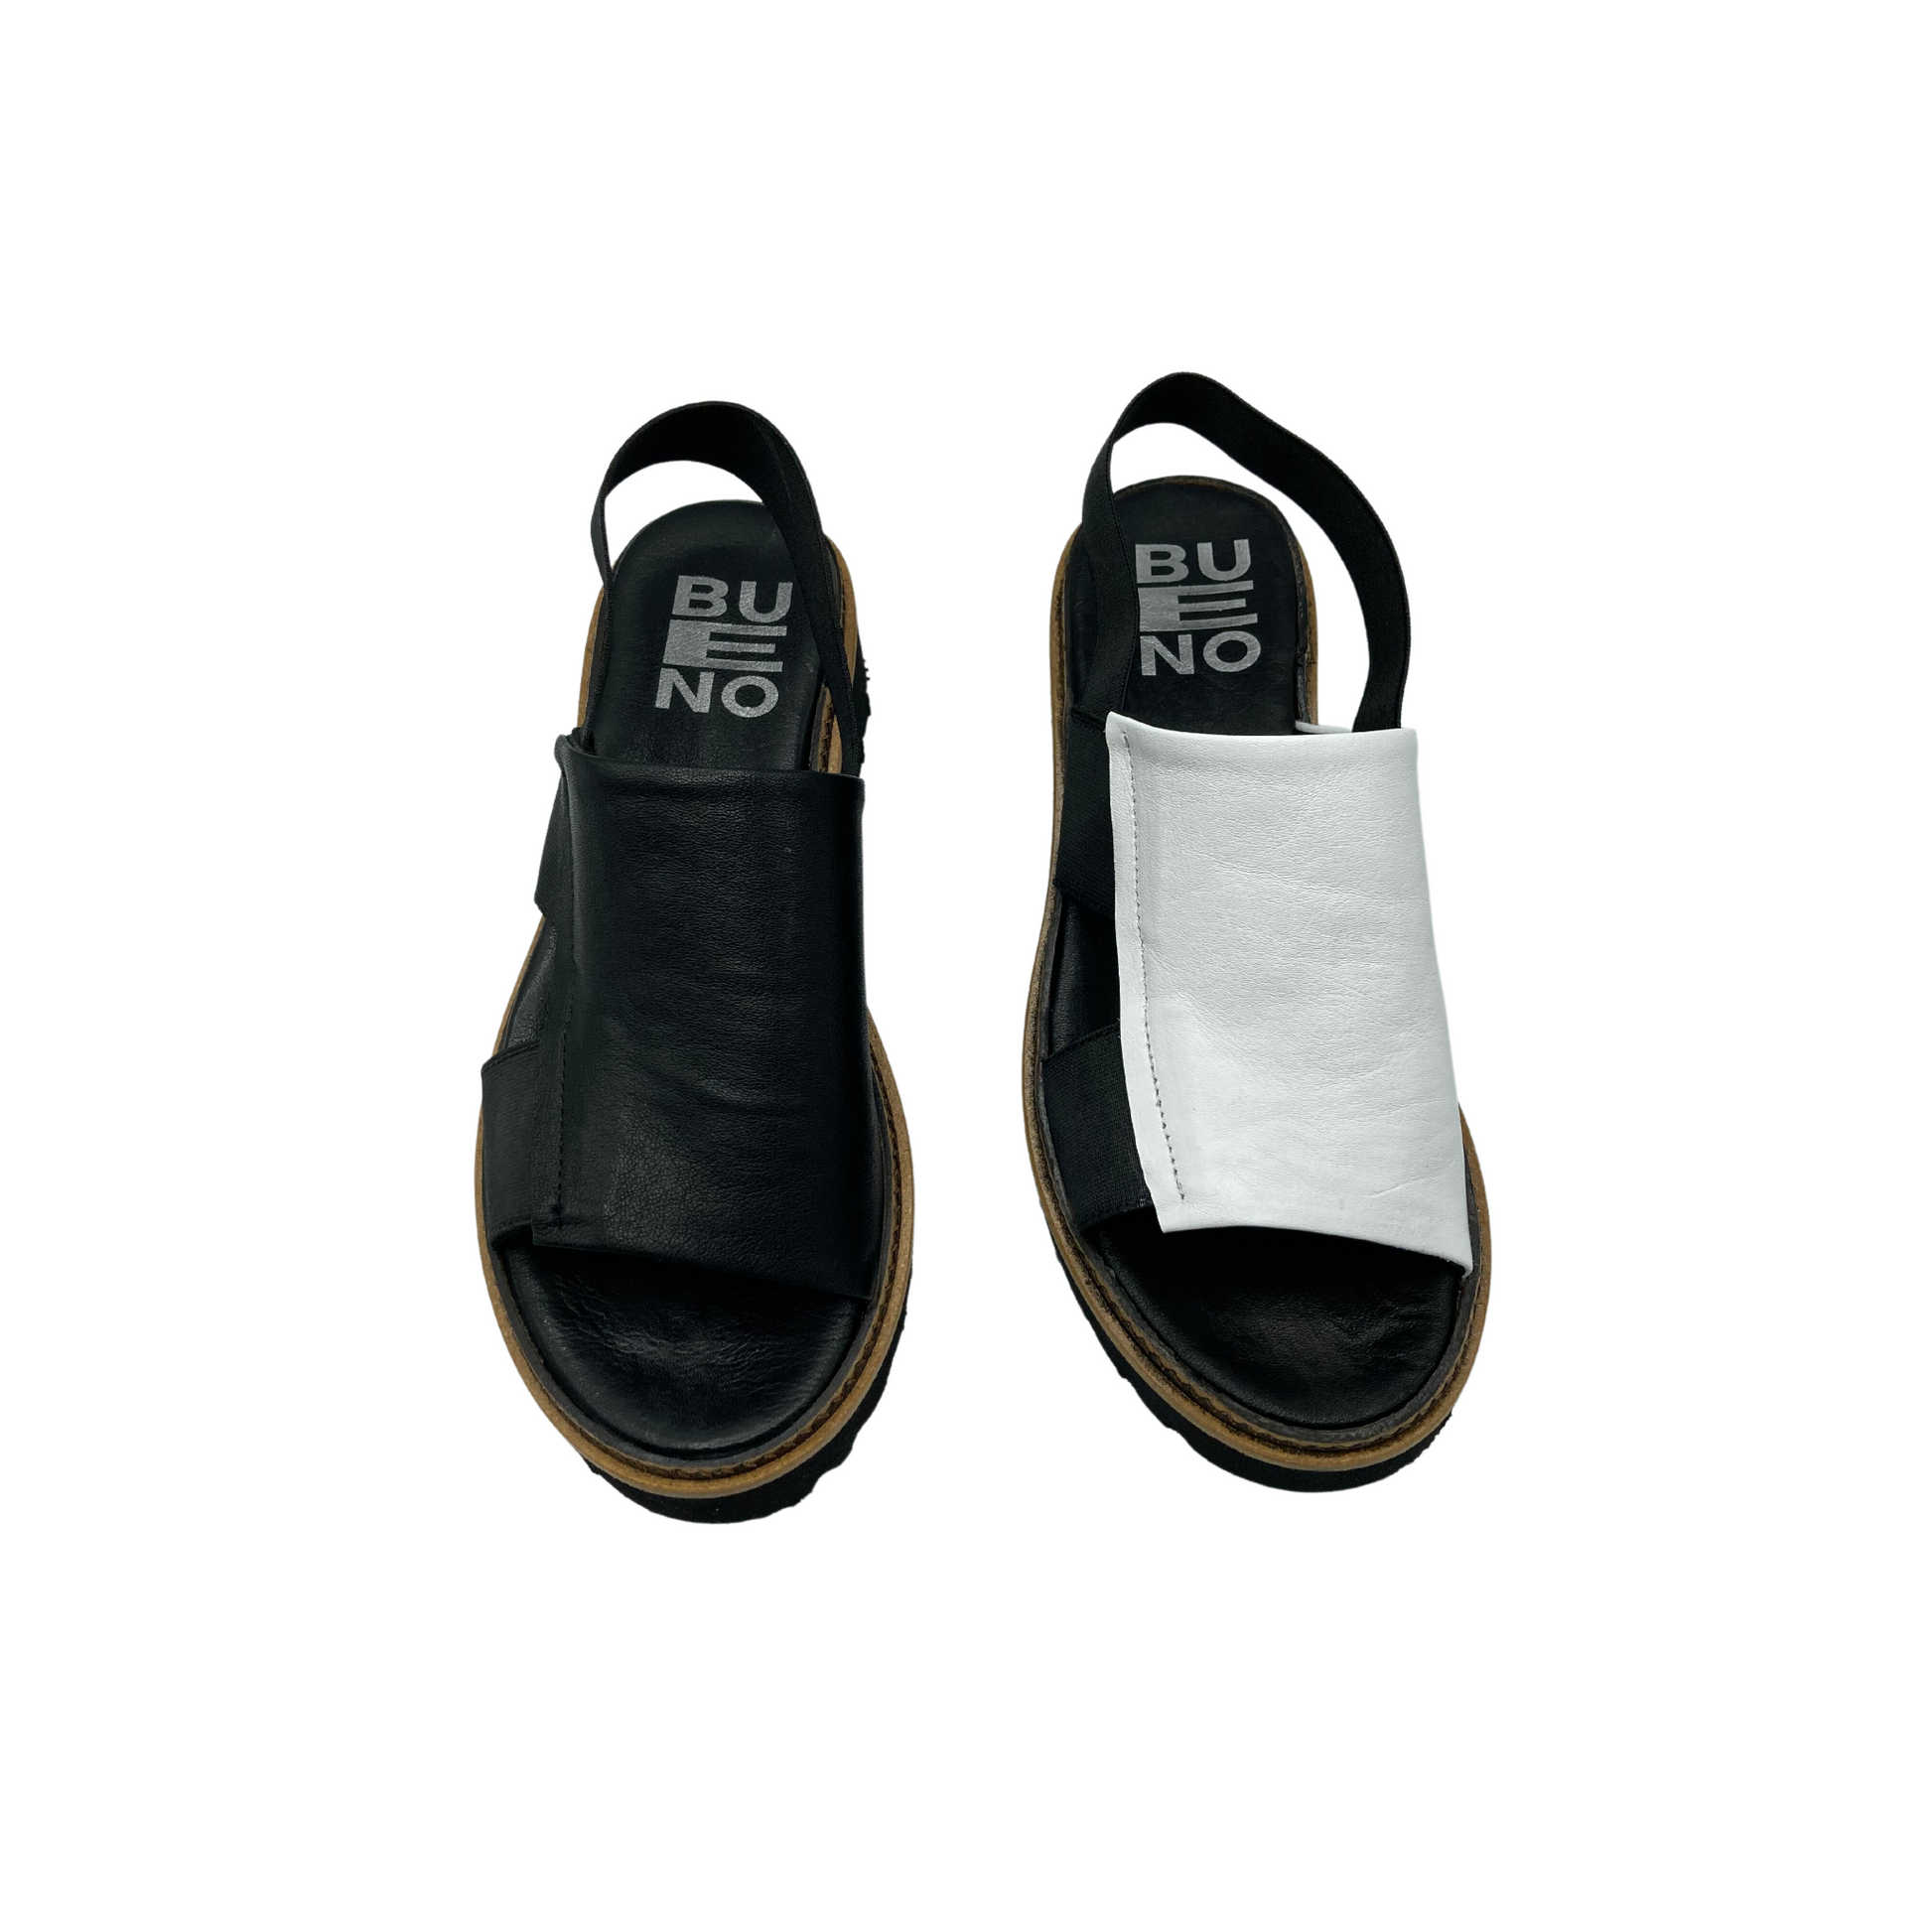 Bueno Amy sandals shown from the front in 2 colorways.  All black and black/white